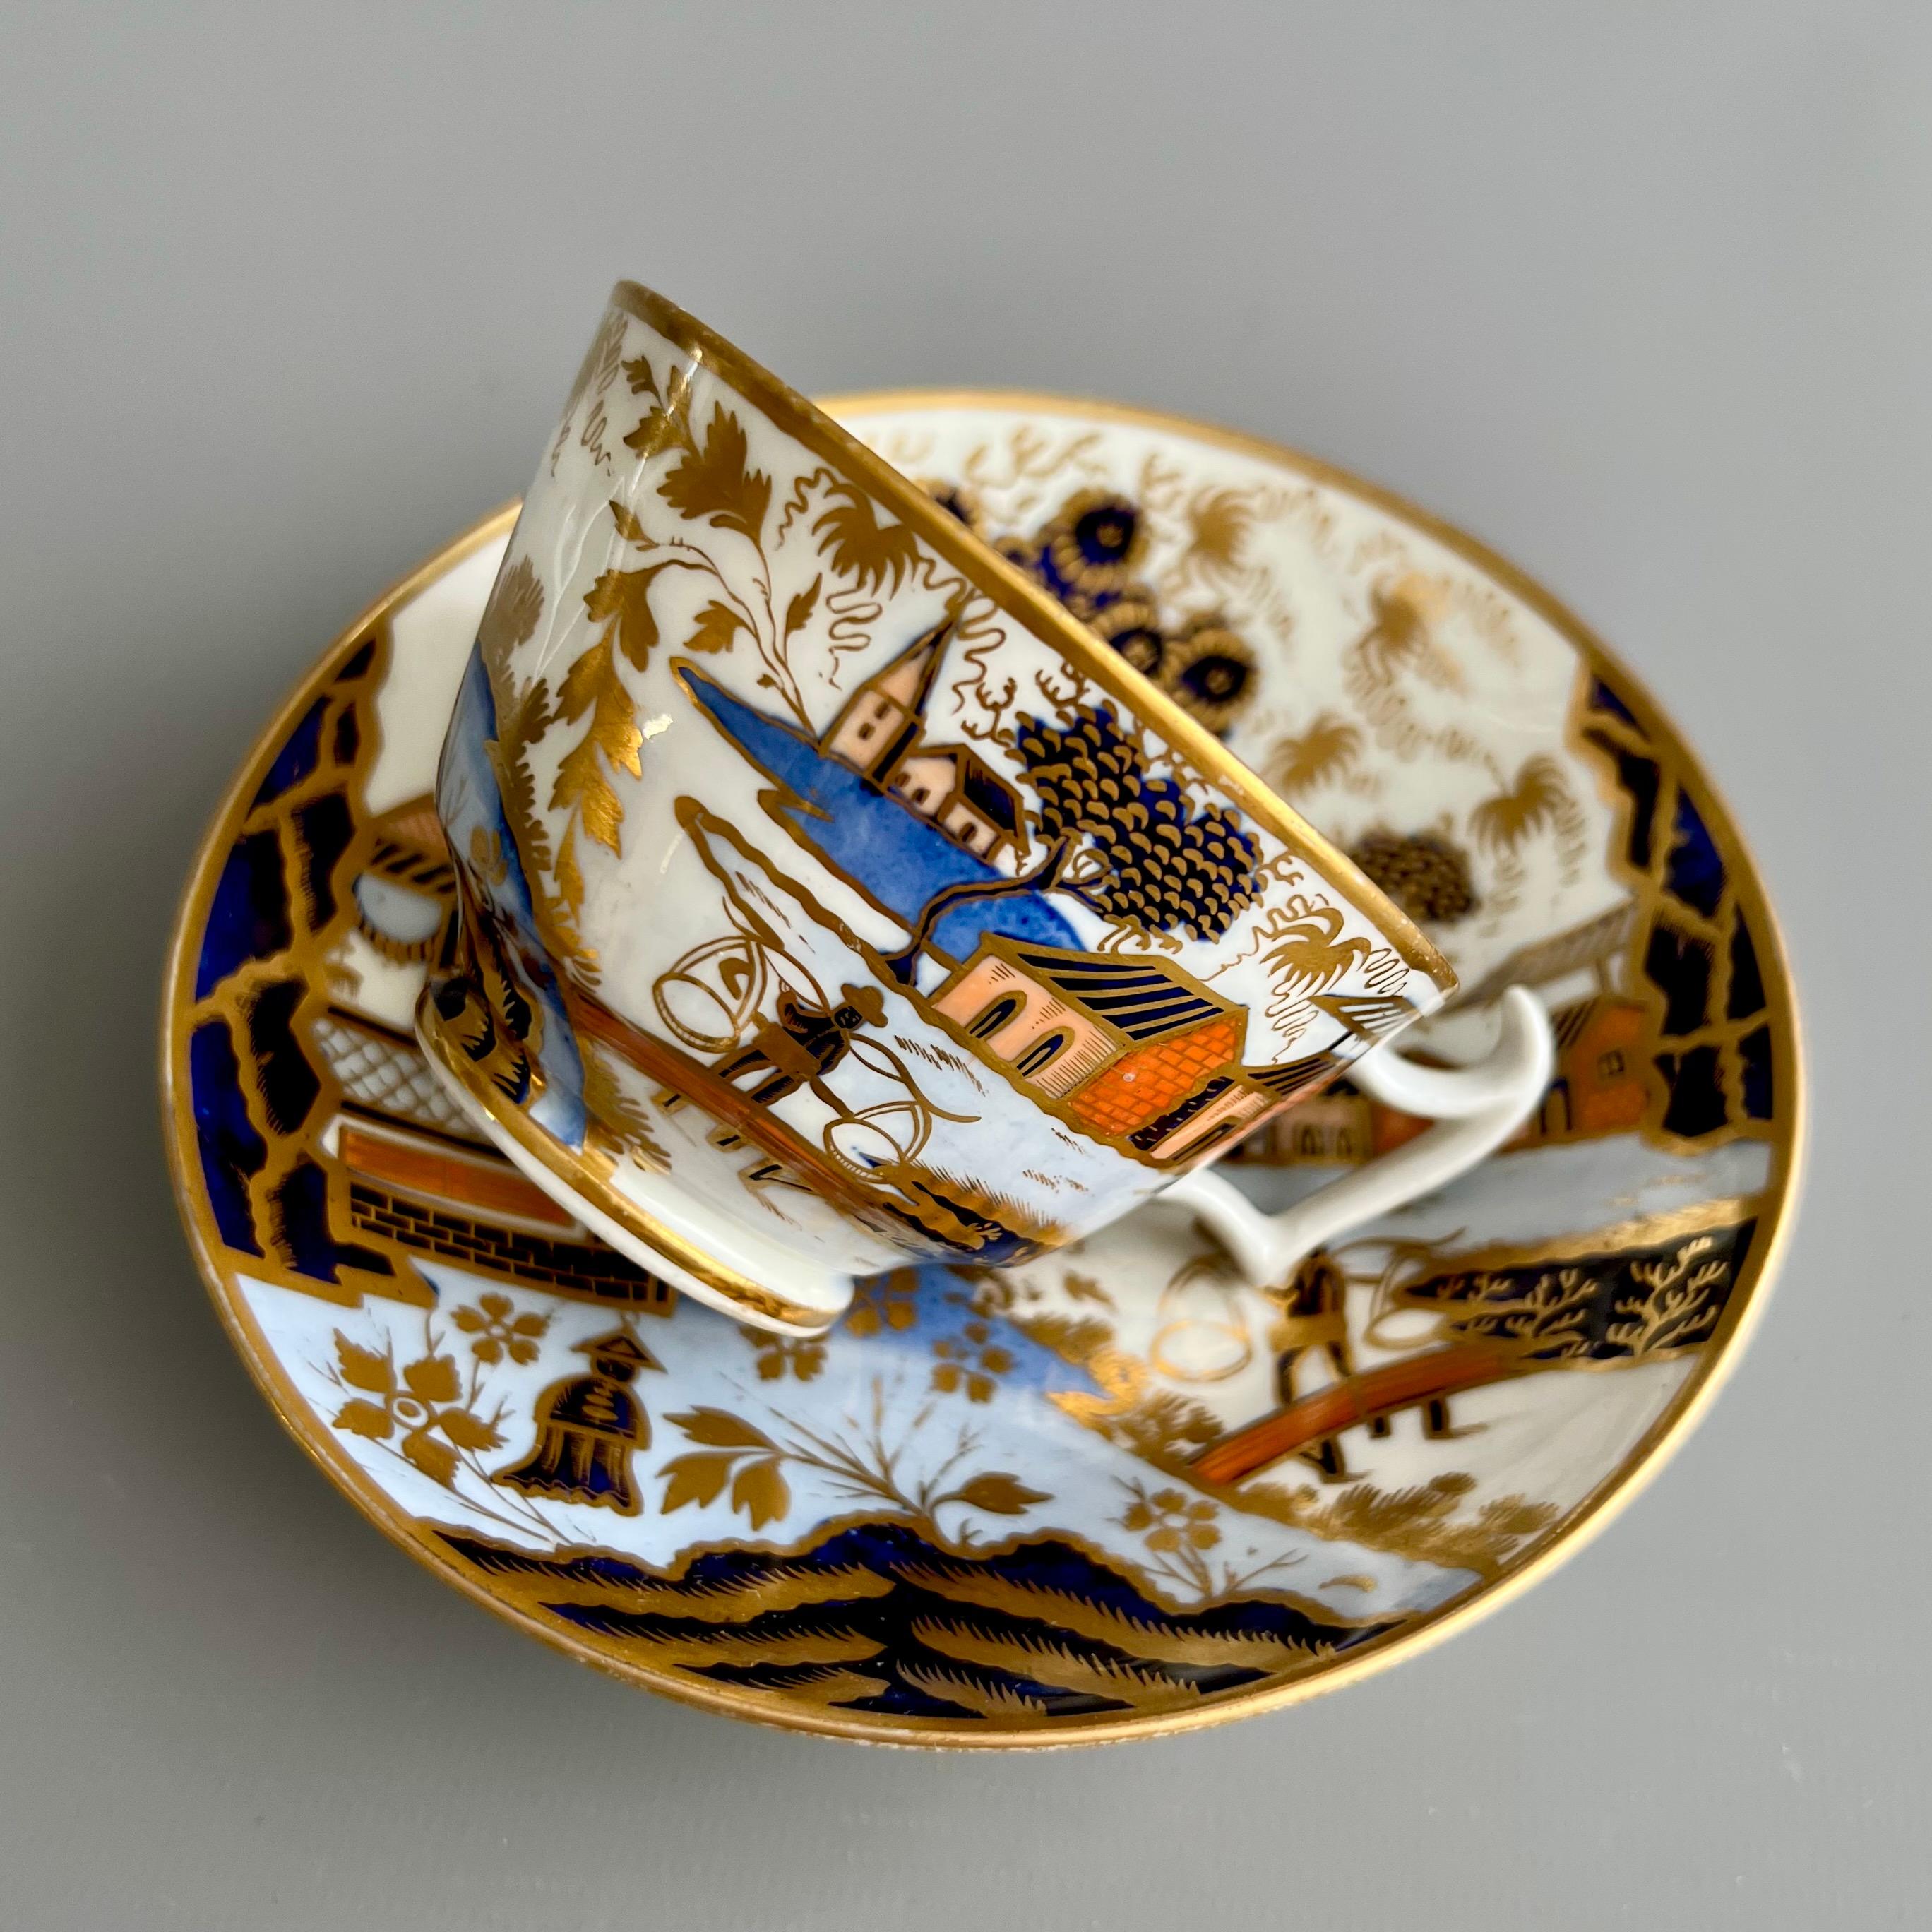 This is gorgeous teacup and saucer made by New Hall around the year 1815. The set is decorated in the popular but very rare Water Carrier pattern.

The New Hall factory started as a cooperative of several Staffordshire potters making use of the